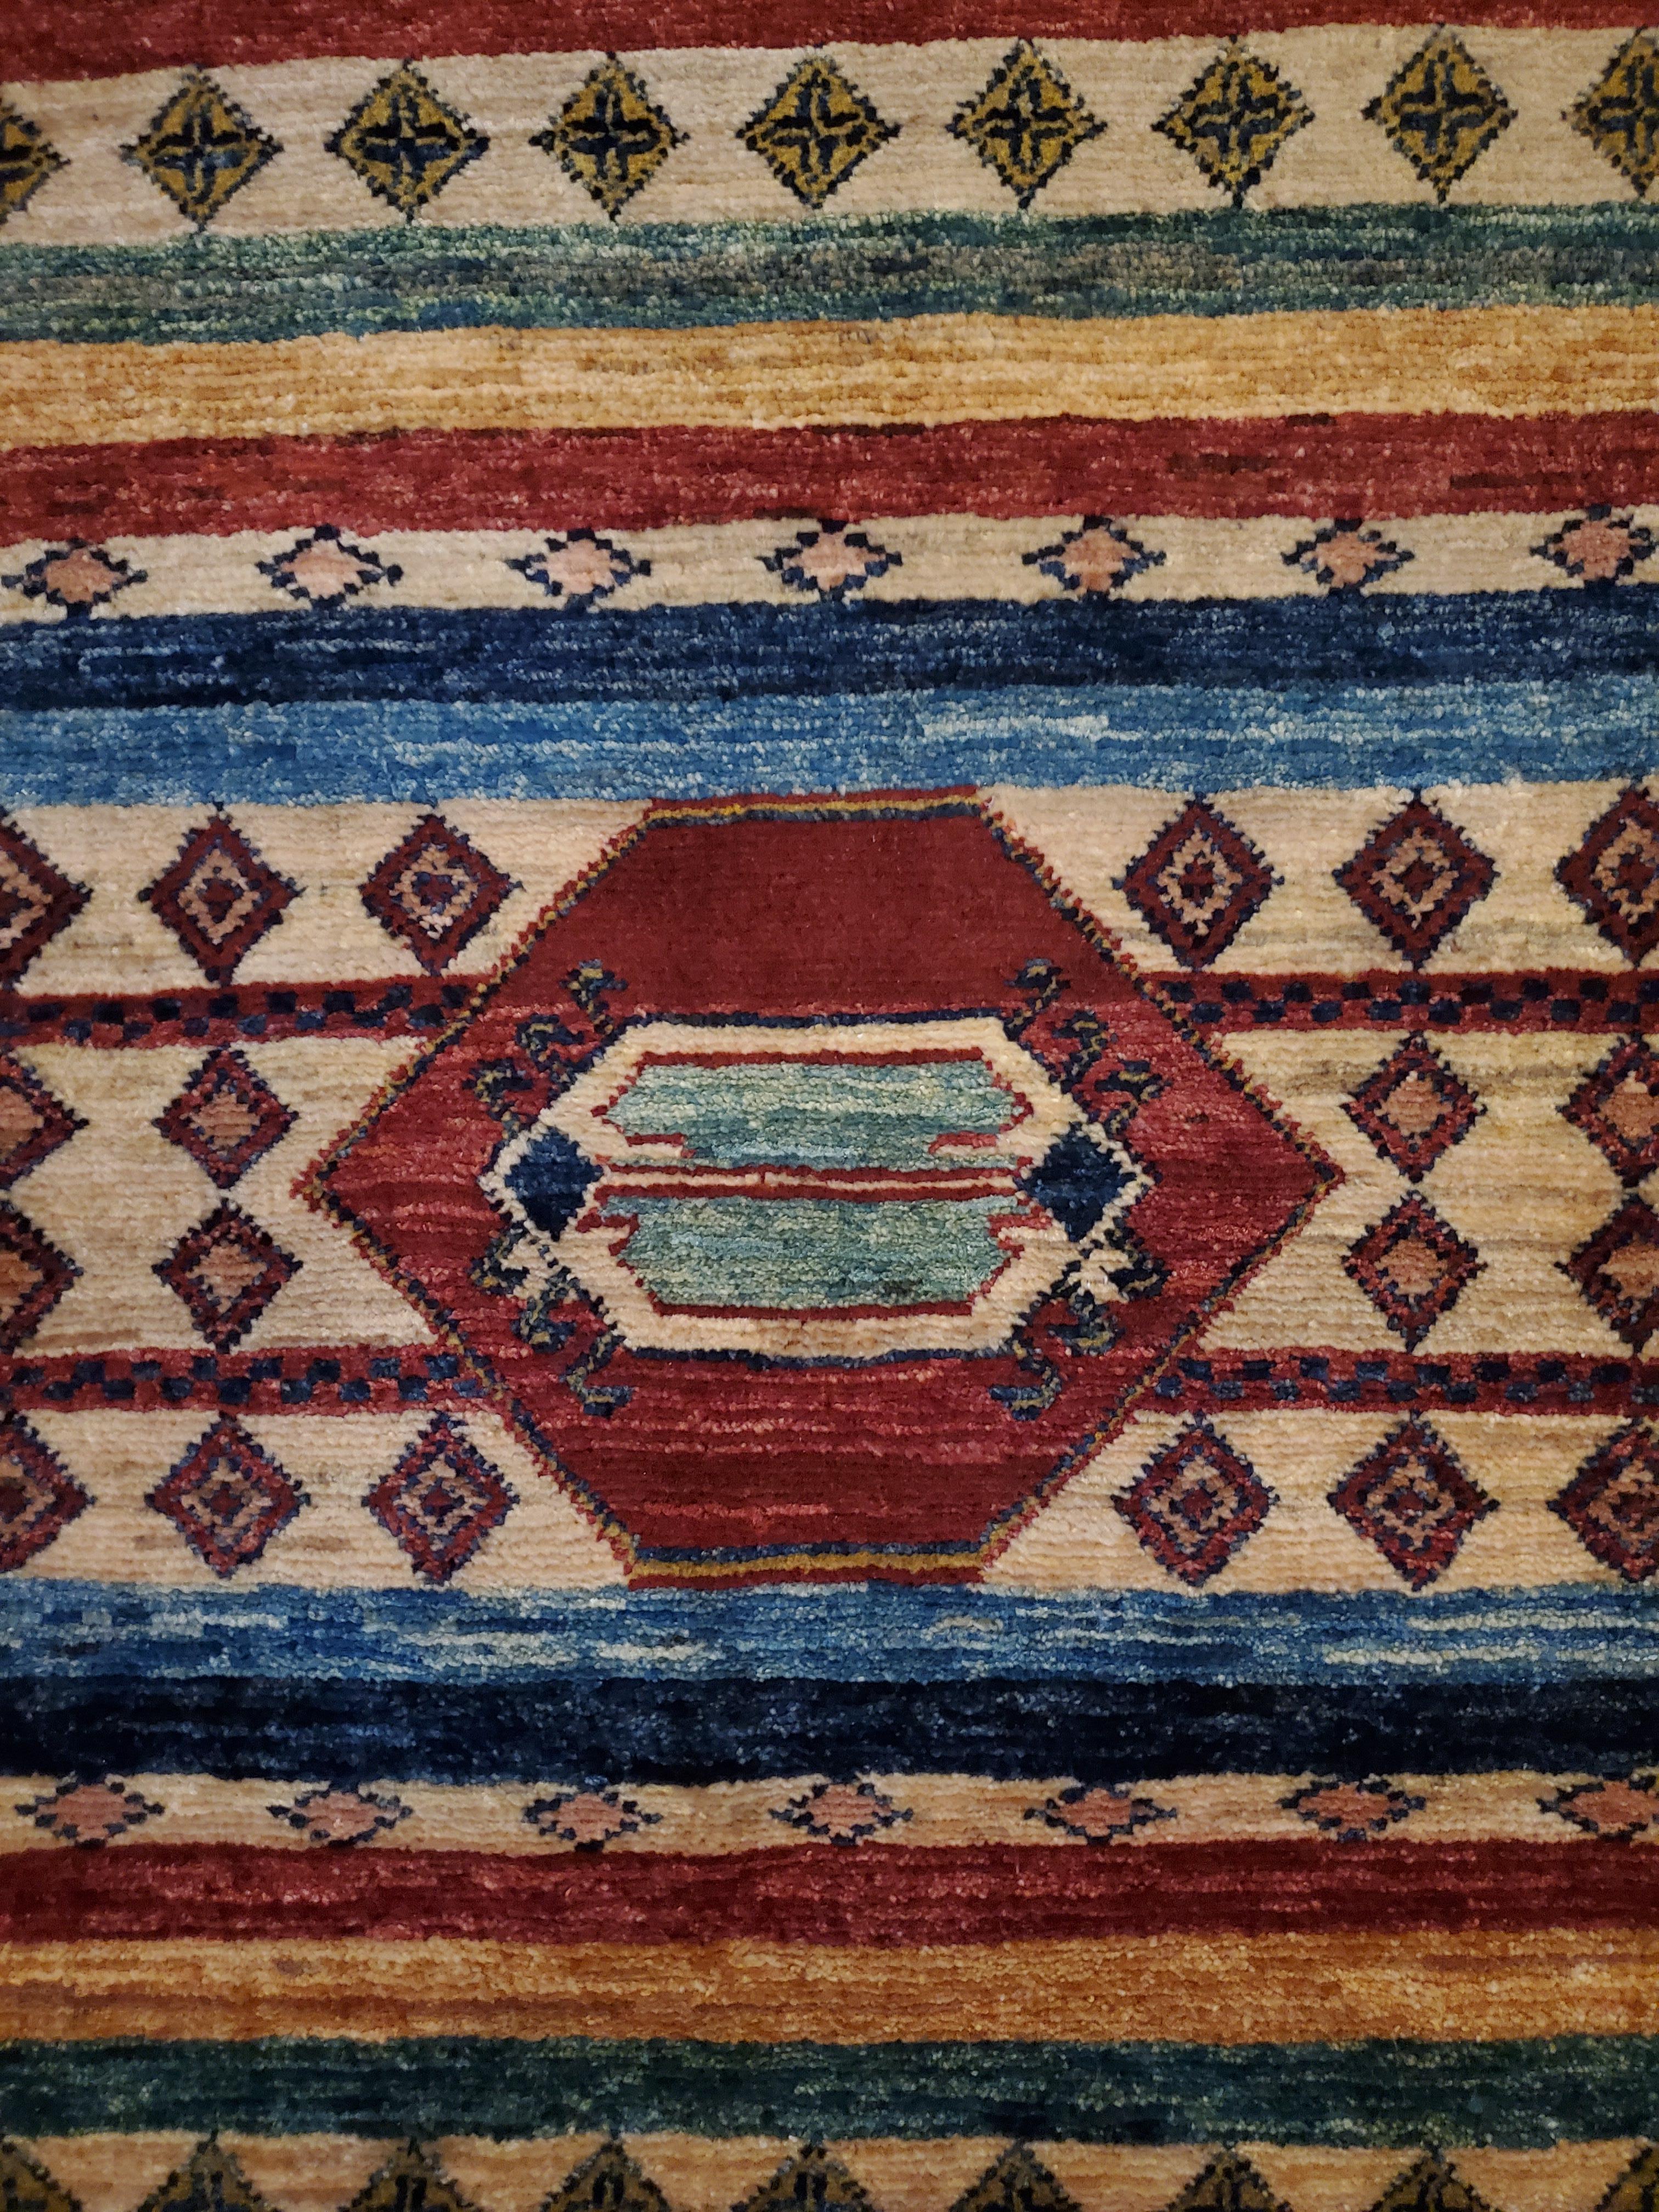 We carry some of the best Afghan bedside rugs, and if you are willing to give your space a colorful new look with one of our stunning carpets, we are here to help. This one measures approximately 39